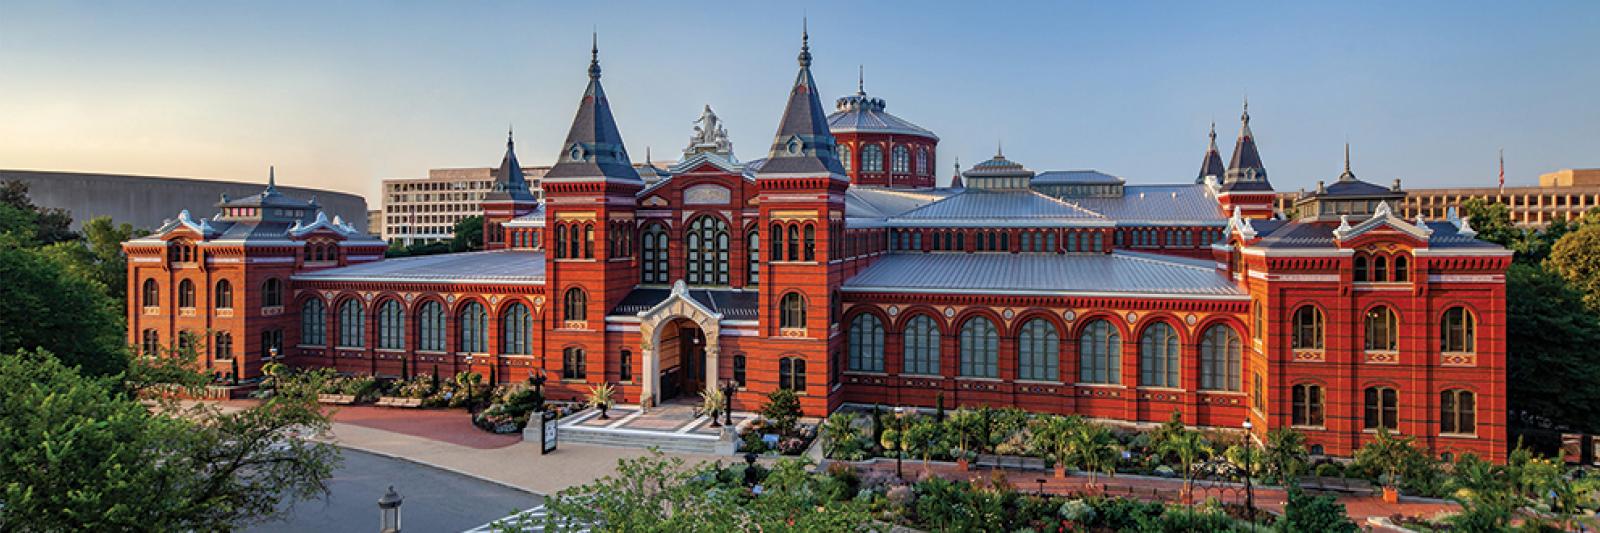 Photo of the exterior of the Smithsonian Arts and Industries Building